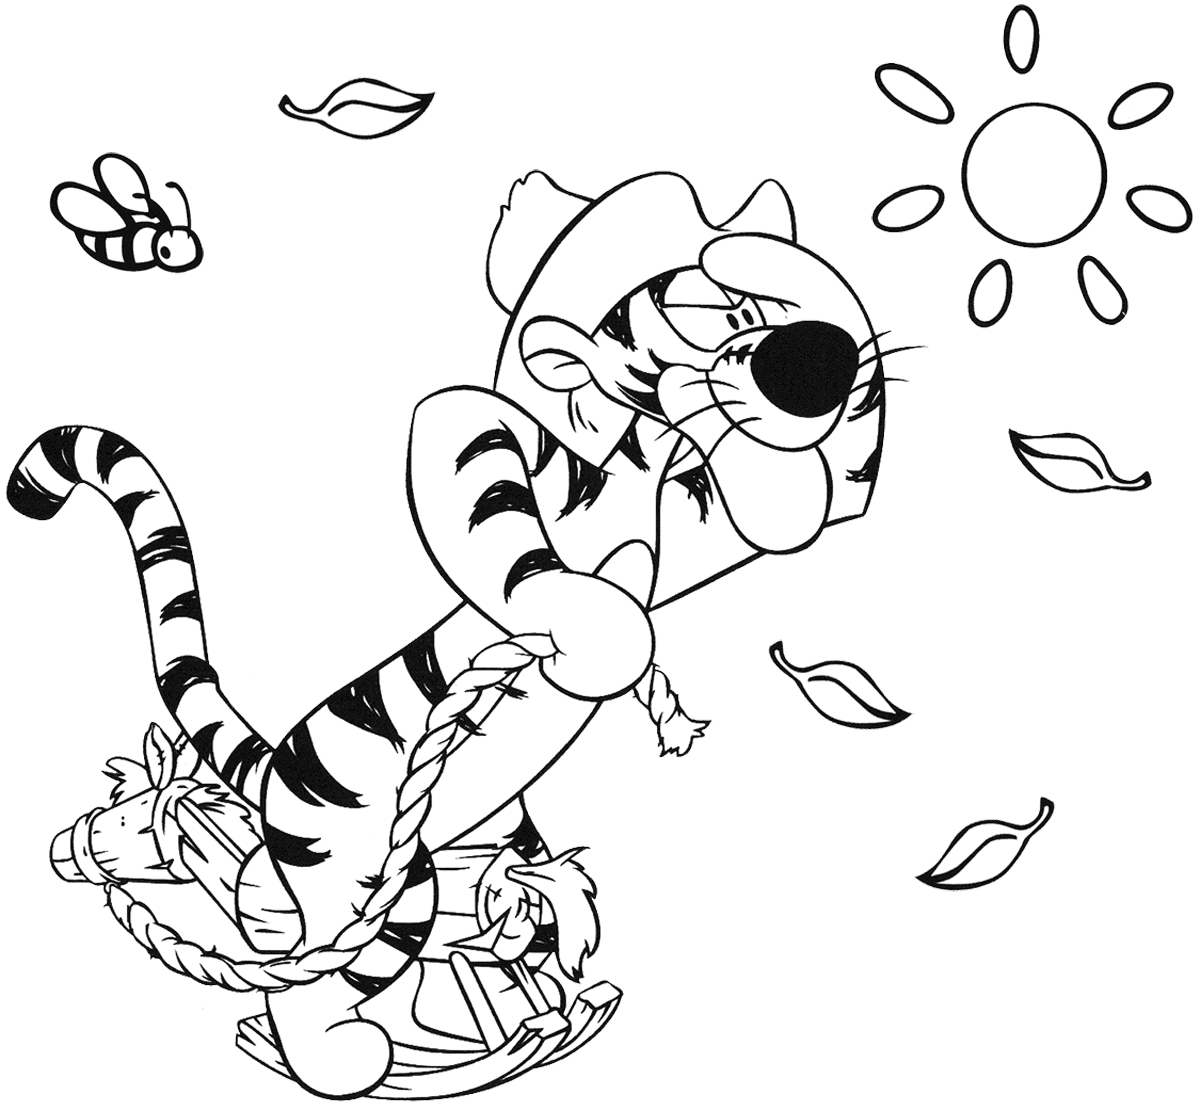 Wrangler Tigger Winnie the Pooh Coloring Pages